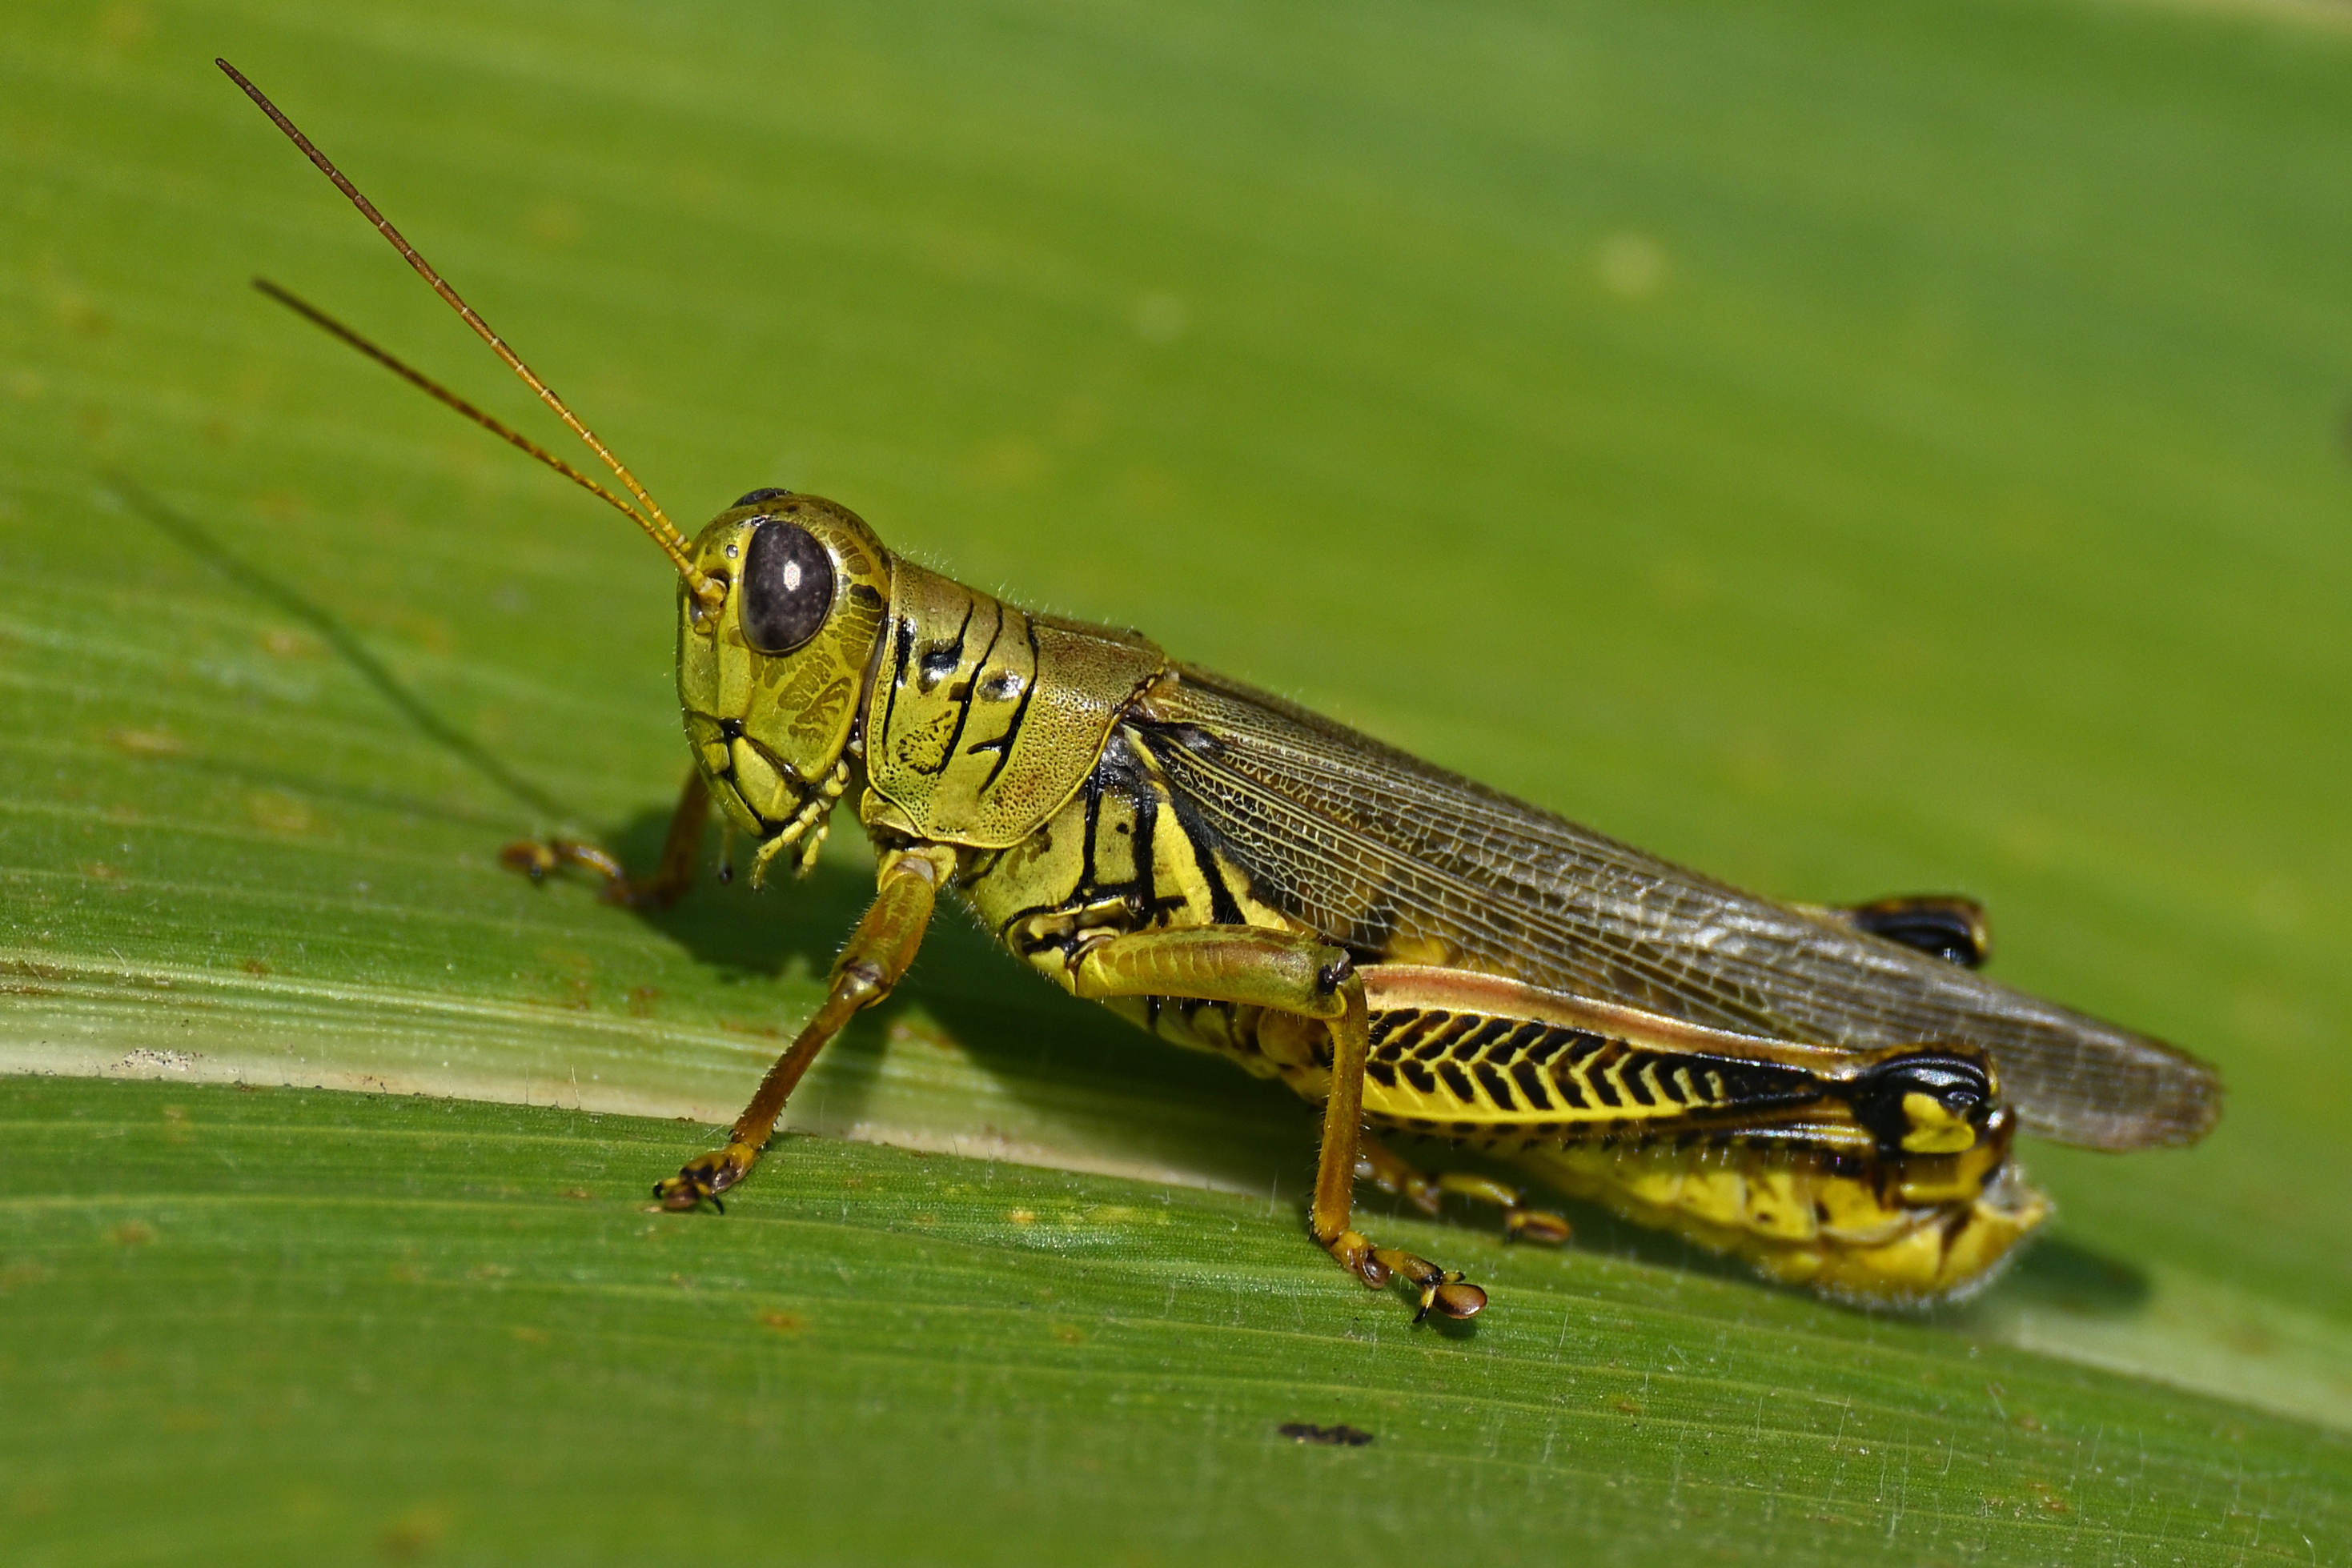 Grasshoppers Can Jump Up To 20x Their Body Length.